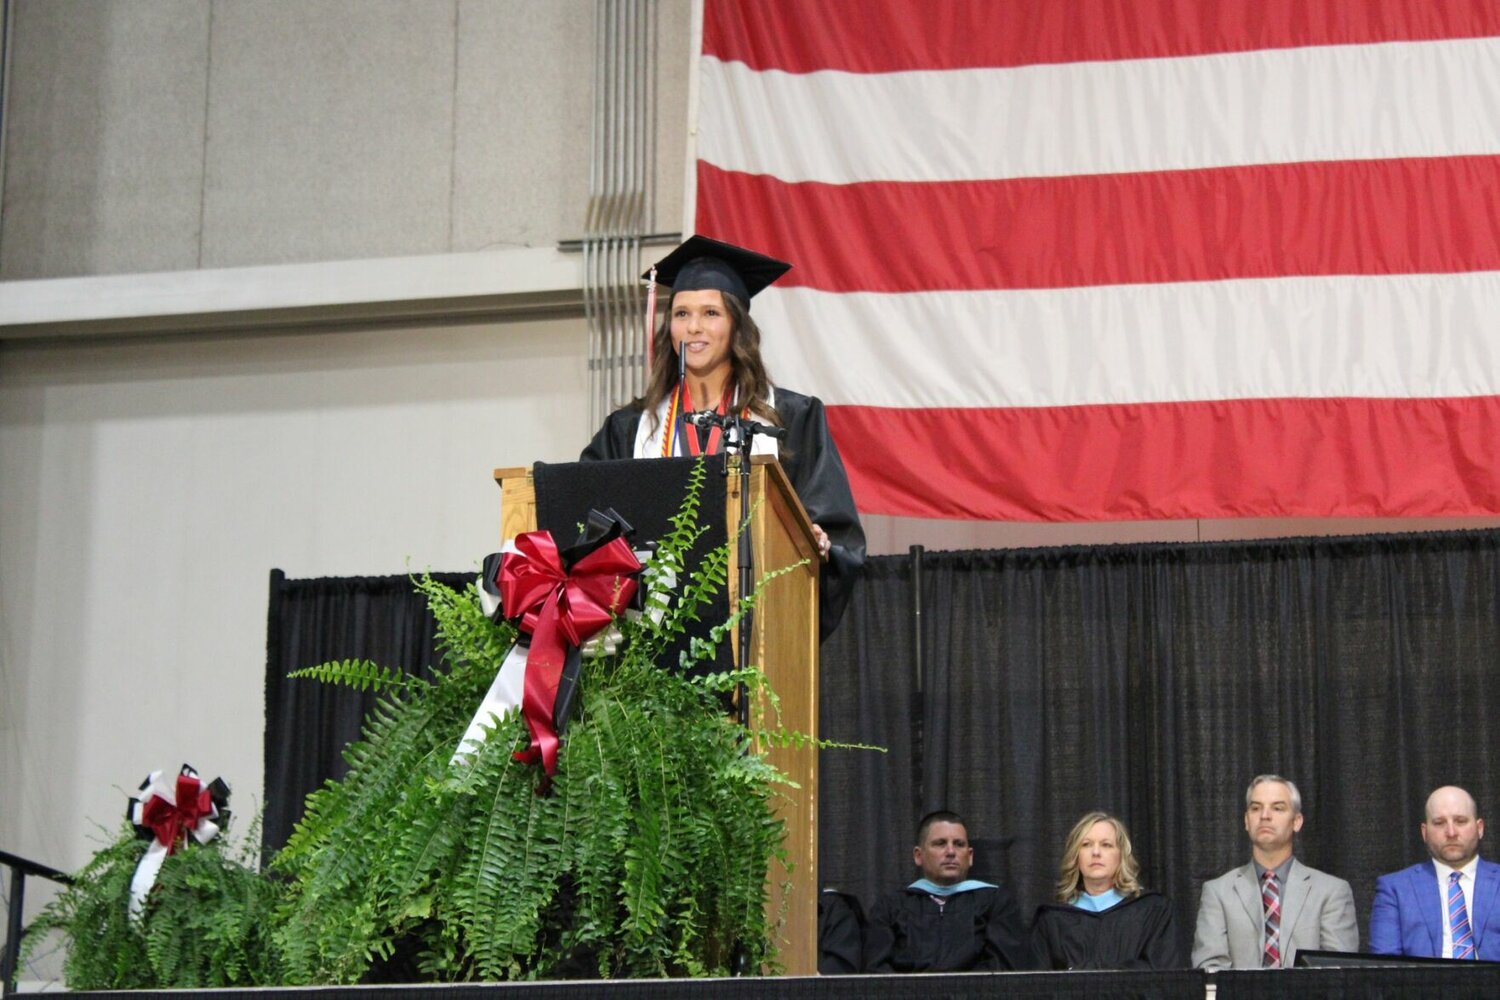 Salutatorian Gracie Vestal addresses the crowd at the Laclede County R-I graduation Saturday, May 20.